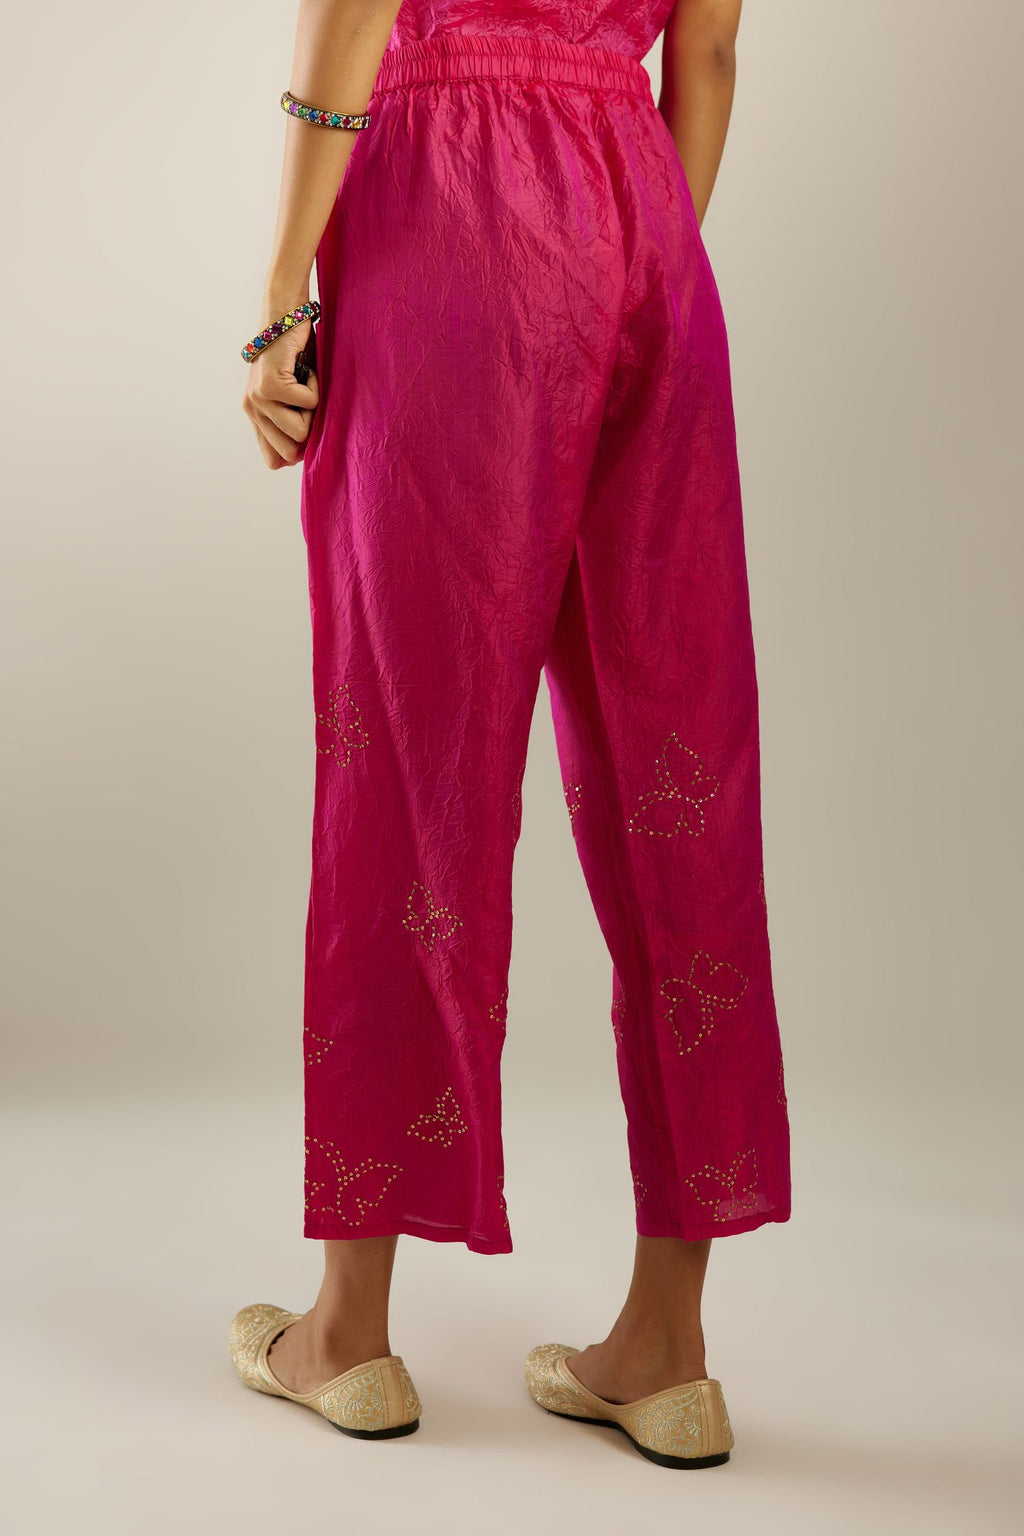 Raspberry crushed silk pants with side pockets and assorted sequined butterflies till mid-calf length.